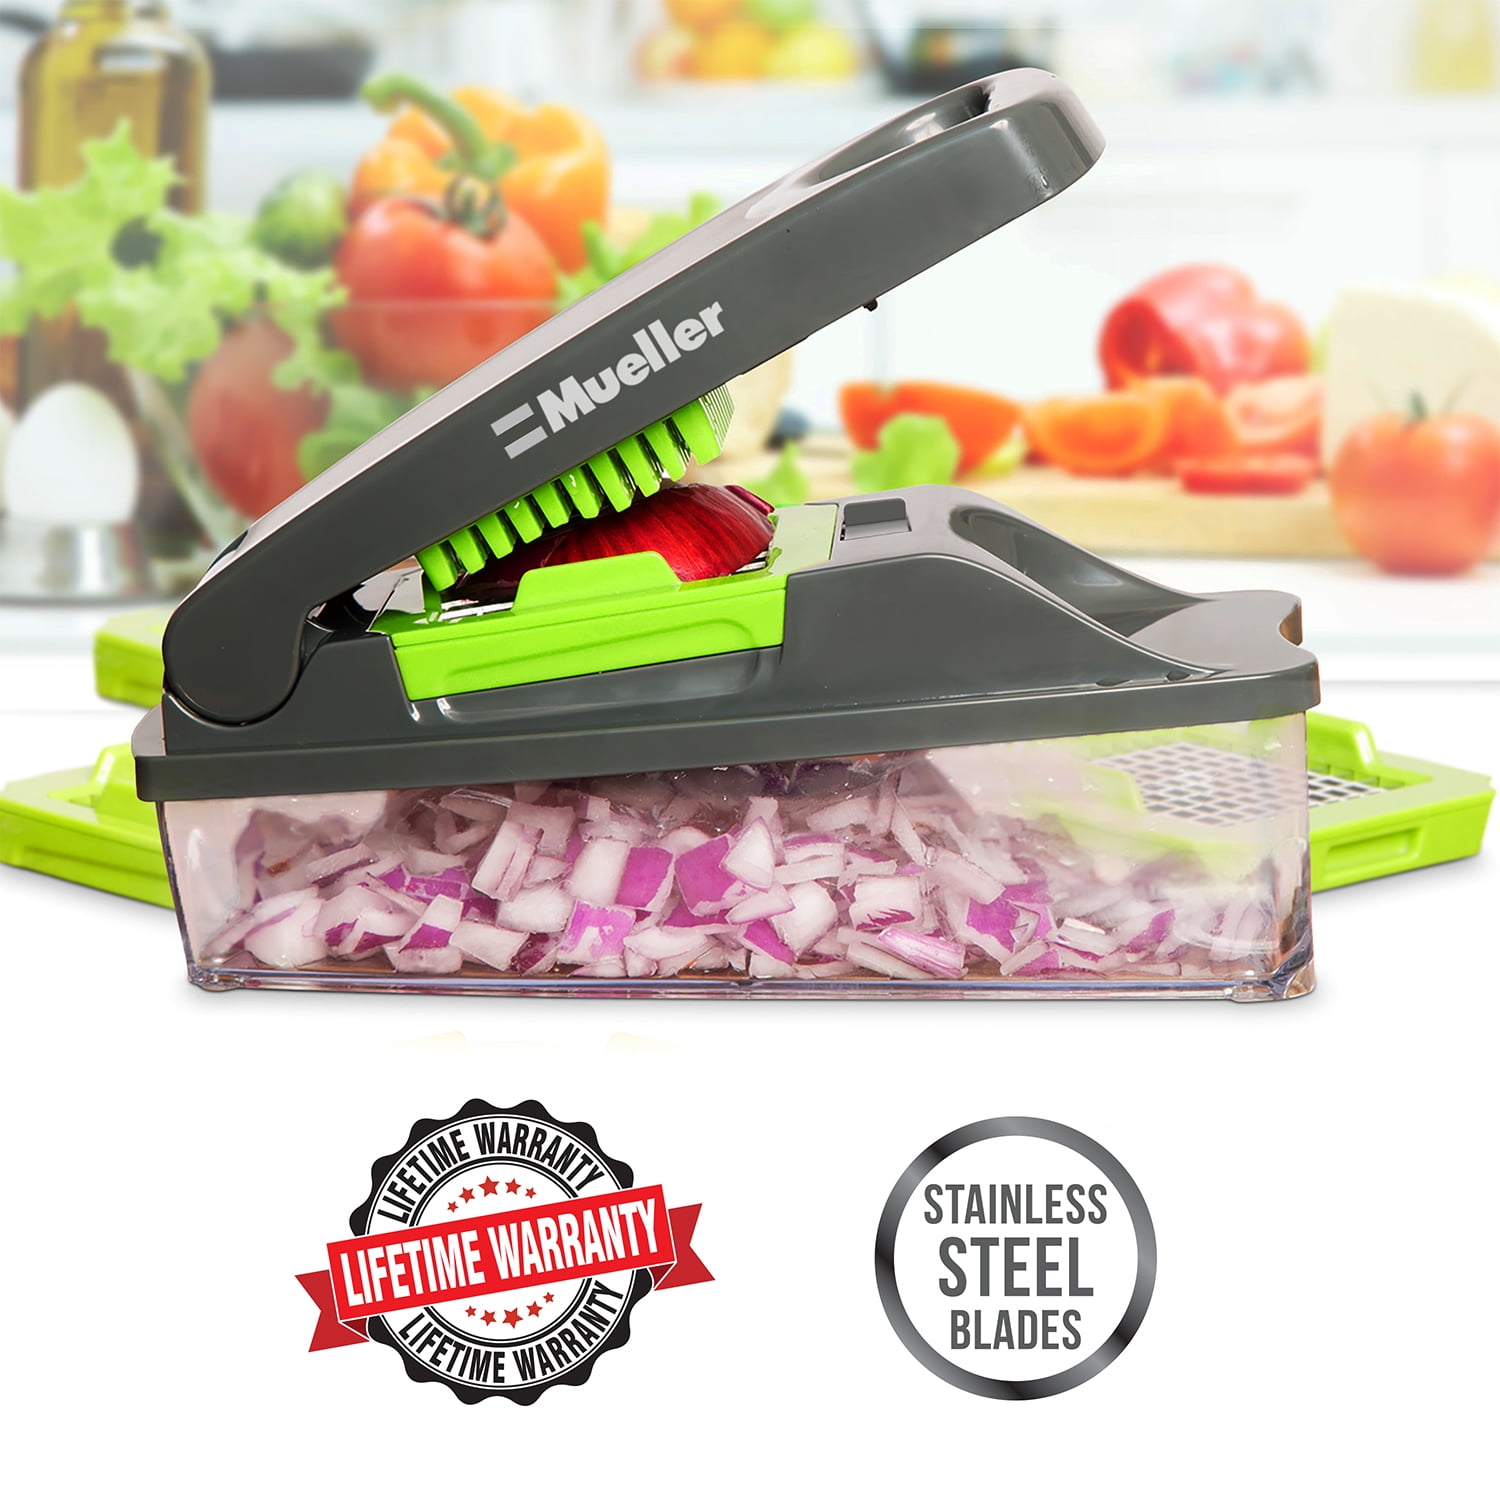 Mueller Vegetable Chopper - Heavy Duty Vegetable Slicer - Food Chopper with  Container - 4 Blades - Walmart.com